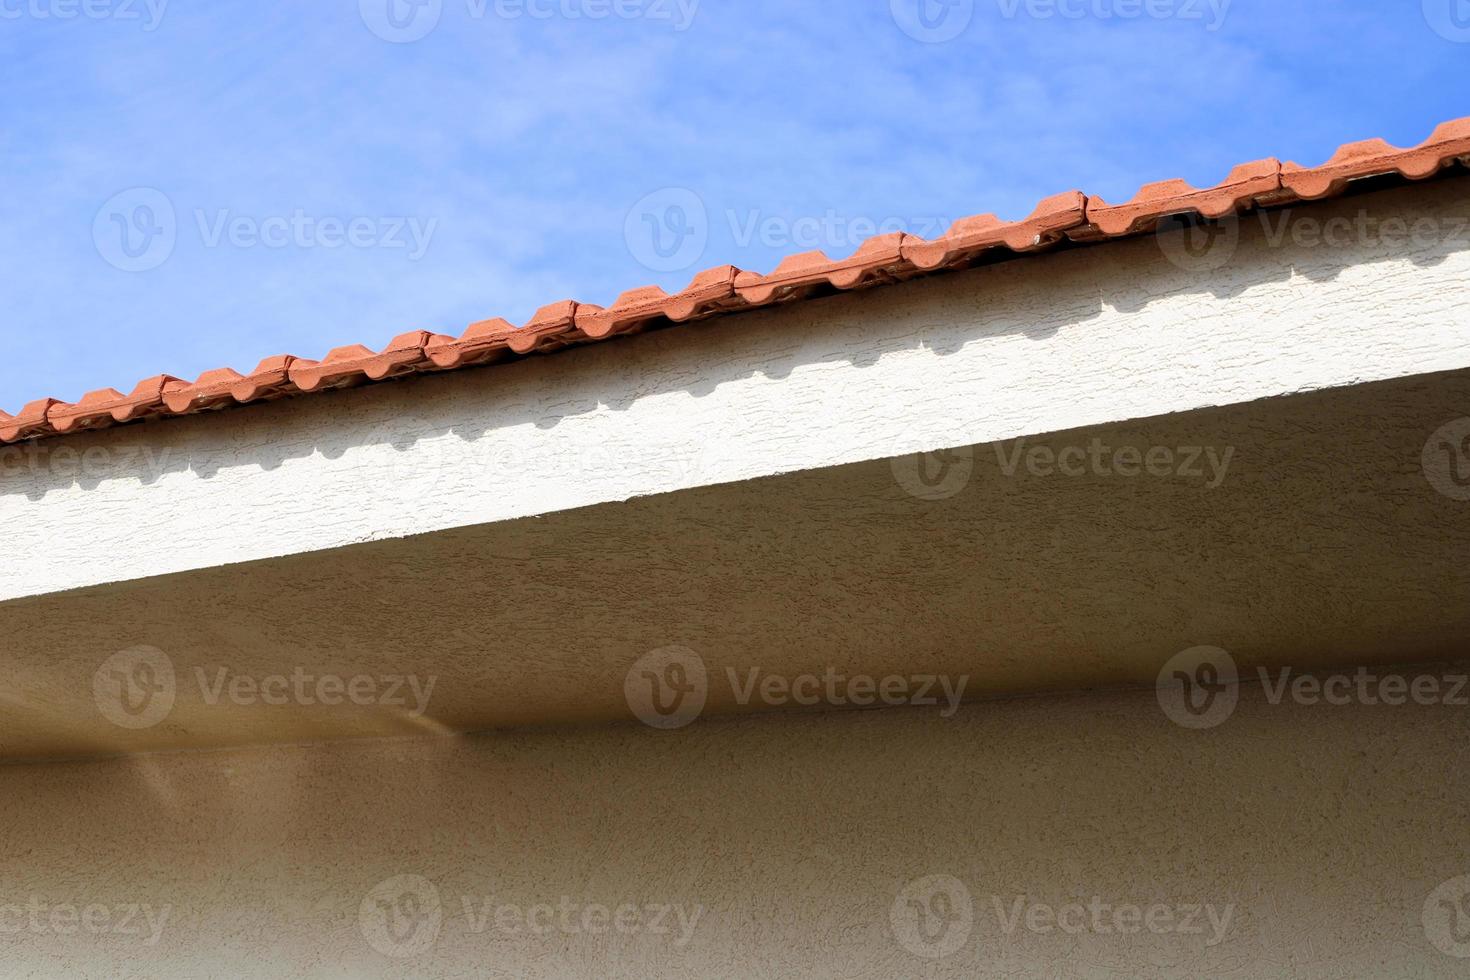 Tiled roof on a residential building in Israel. photo